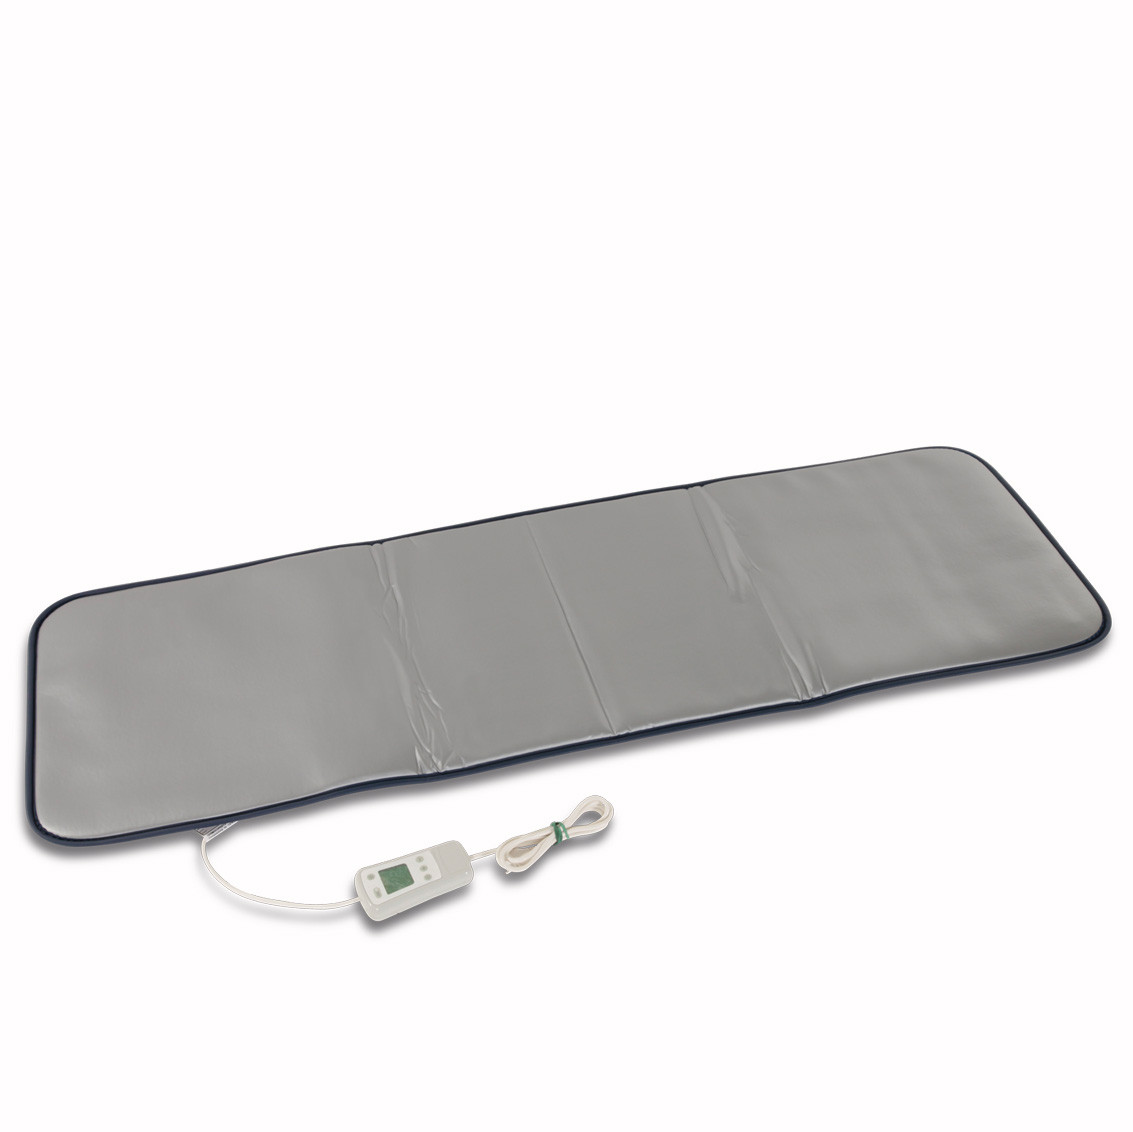 Large thermal blanket with adjustable temperature via Tcontroller